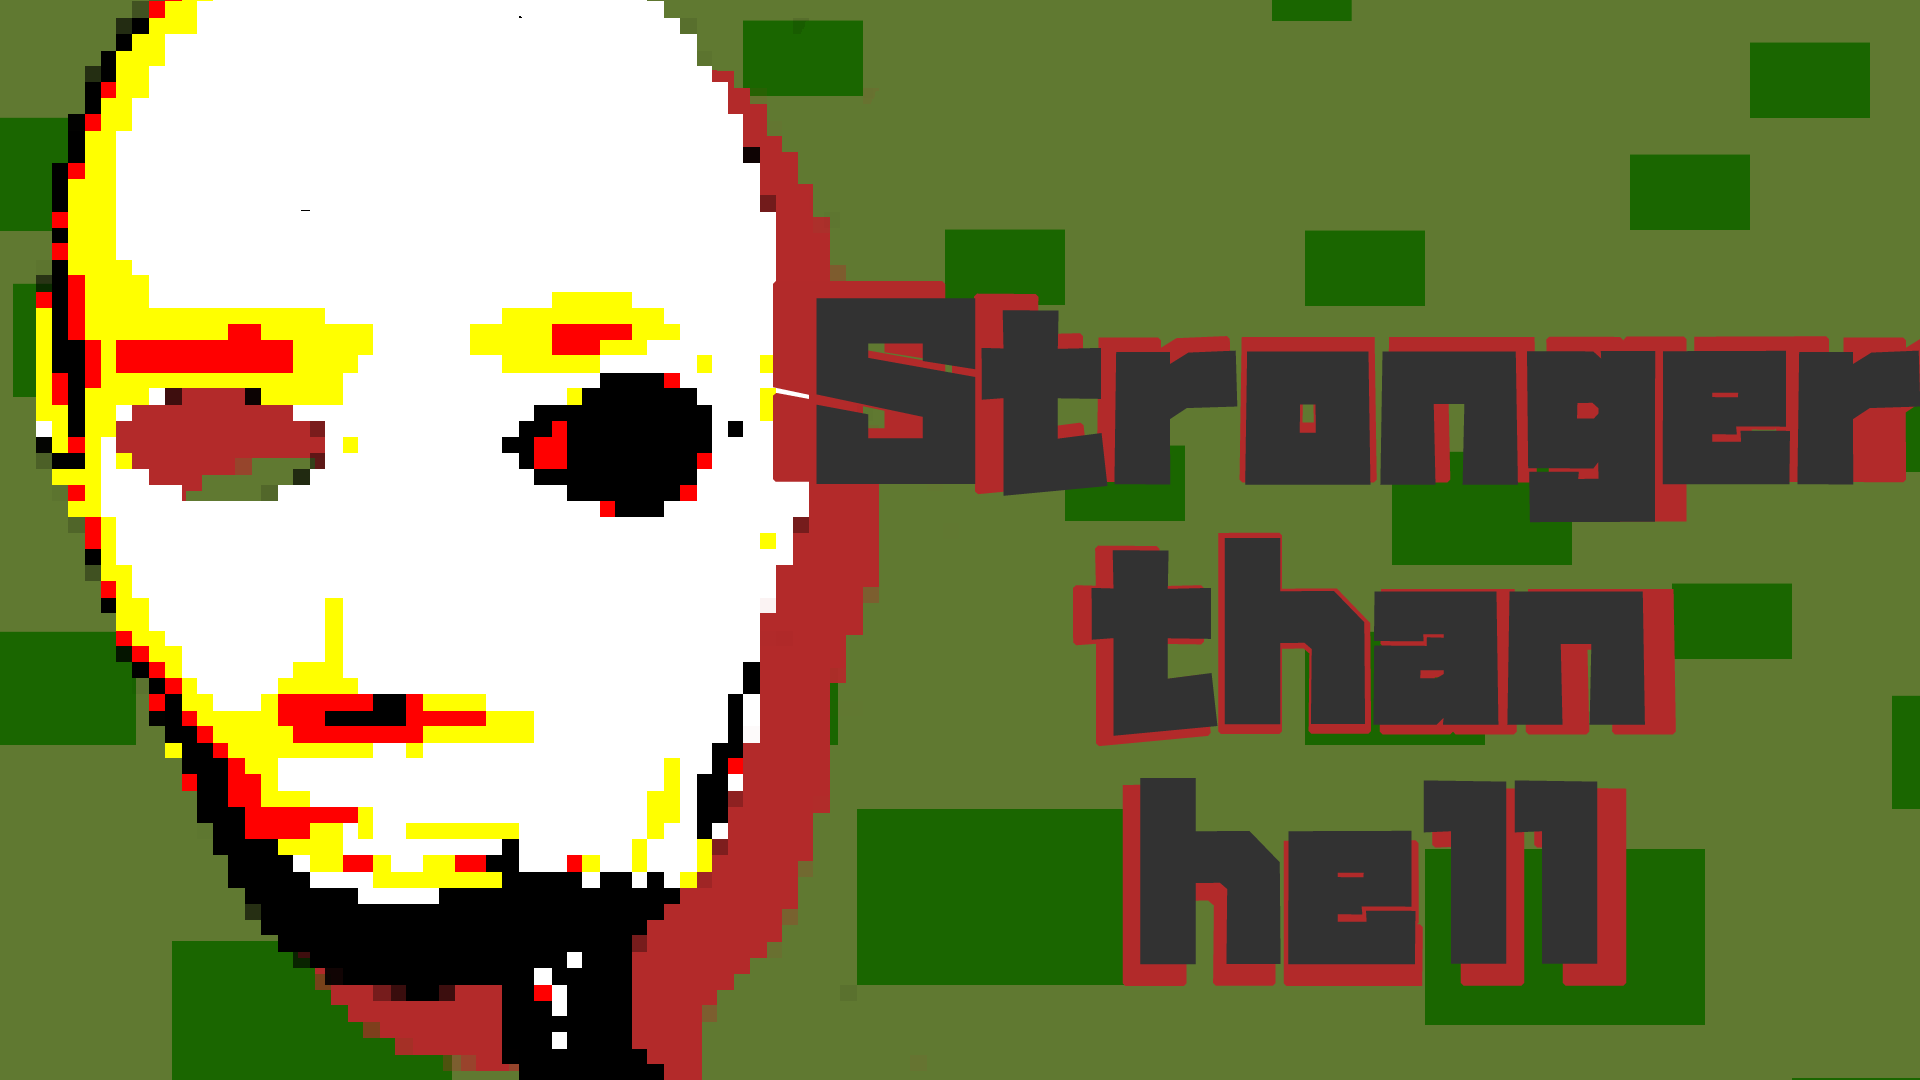 Stronger than hell